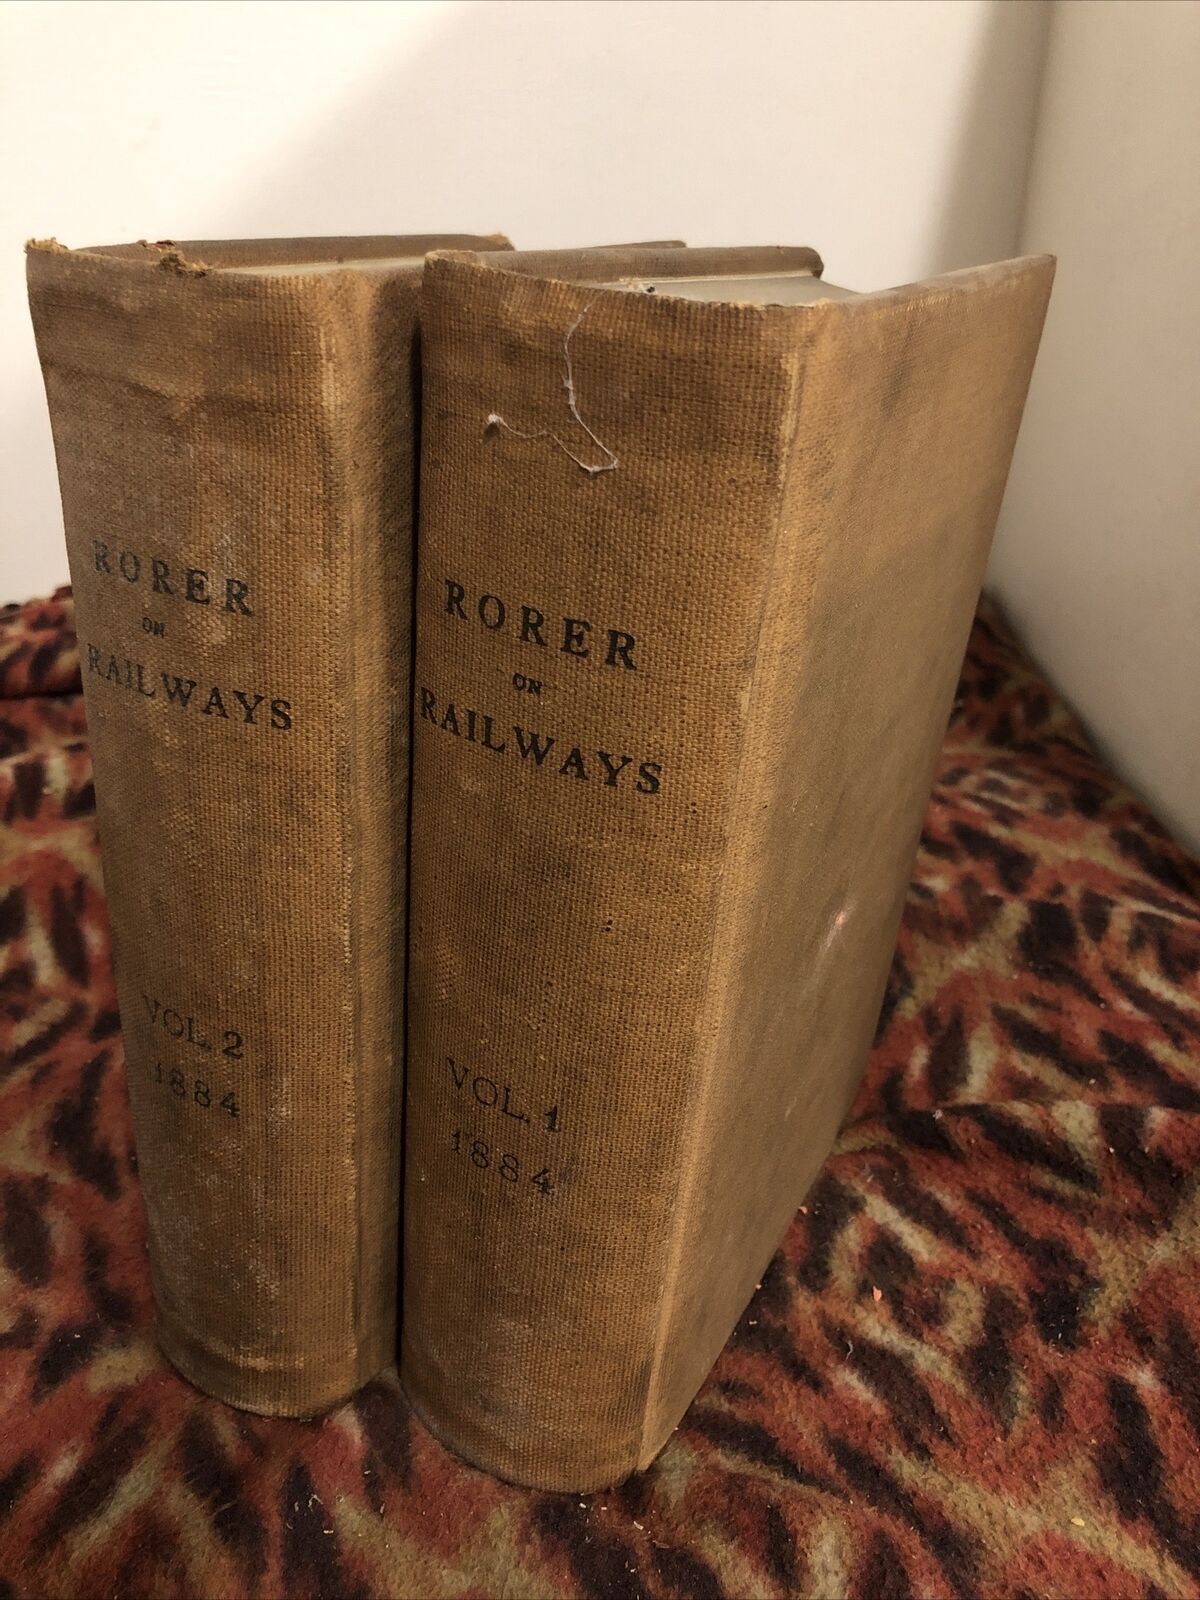 Rorer On Railways Vol 1 And 2 1884 Hardcover Antique Very Good